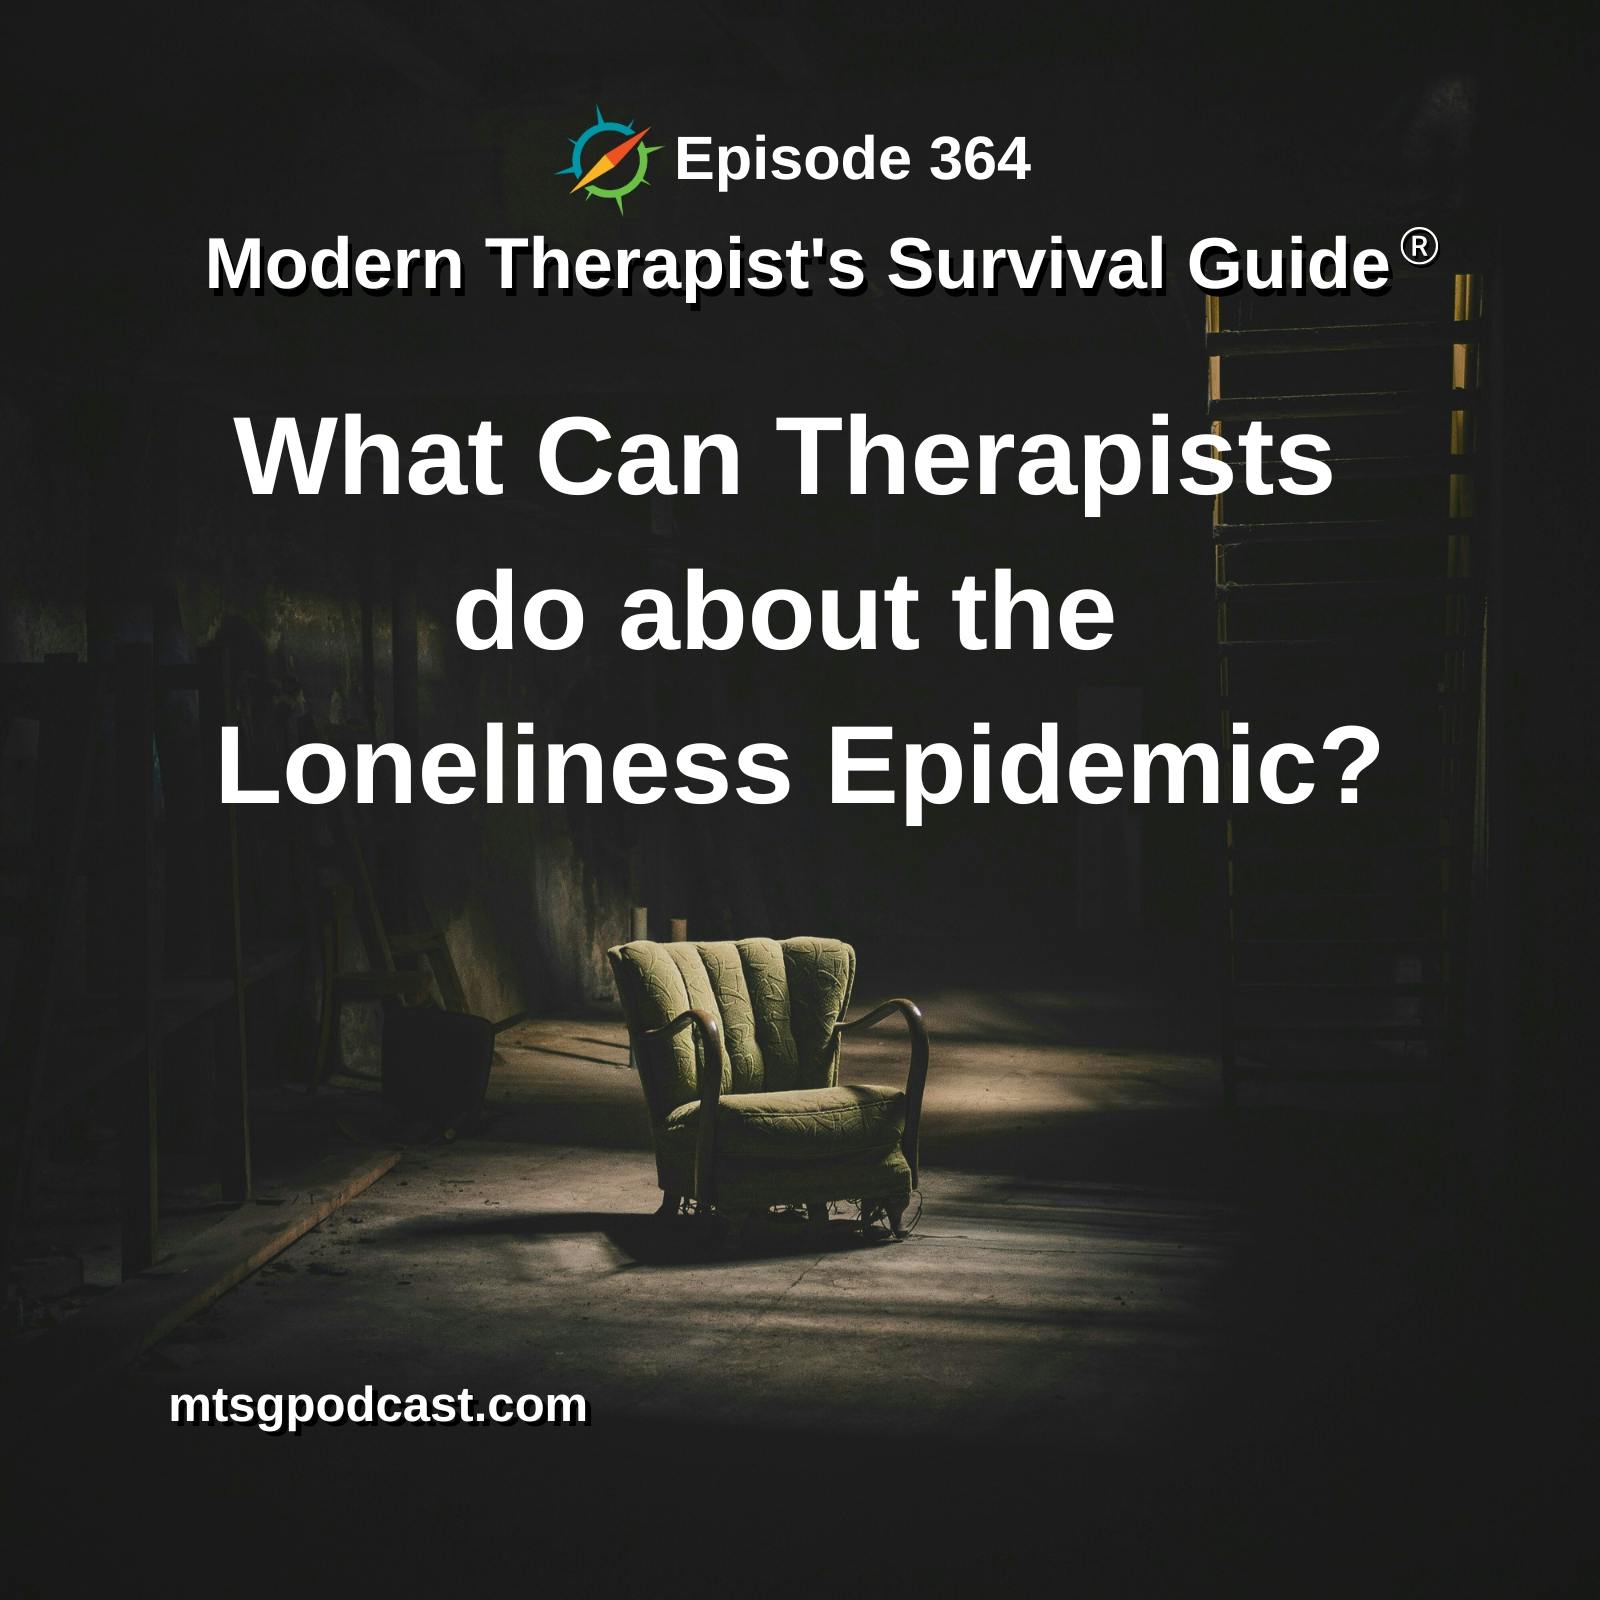 What Can Therapists Do About the Loneliness Epidemic?